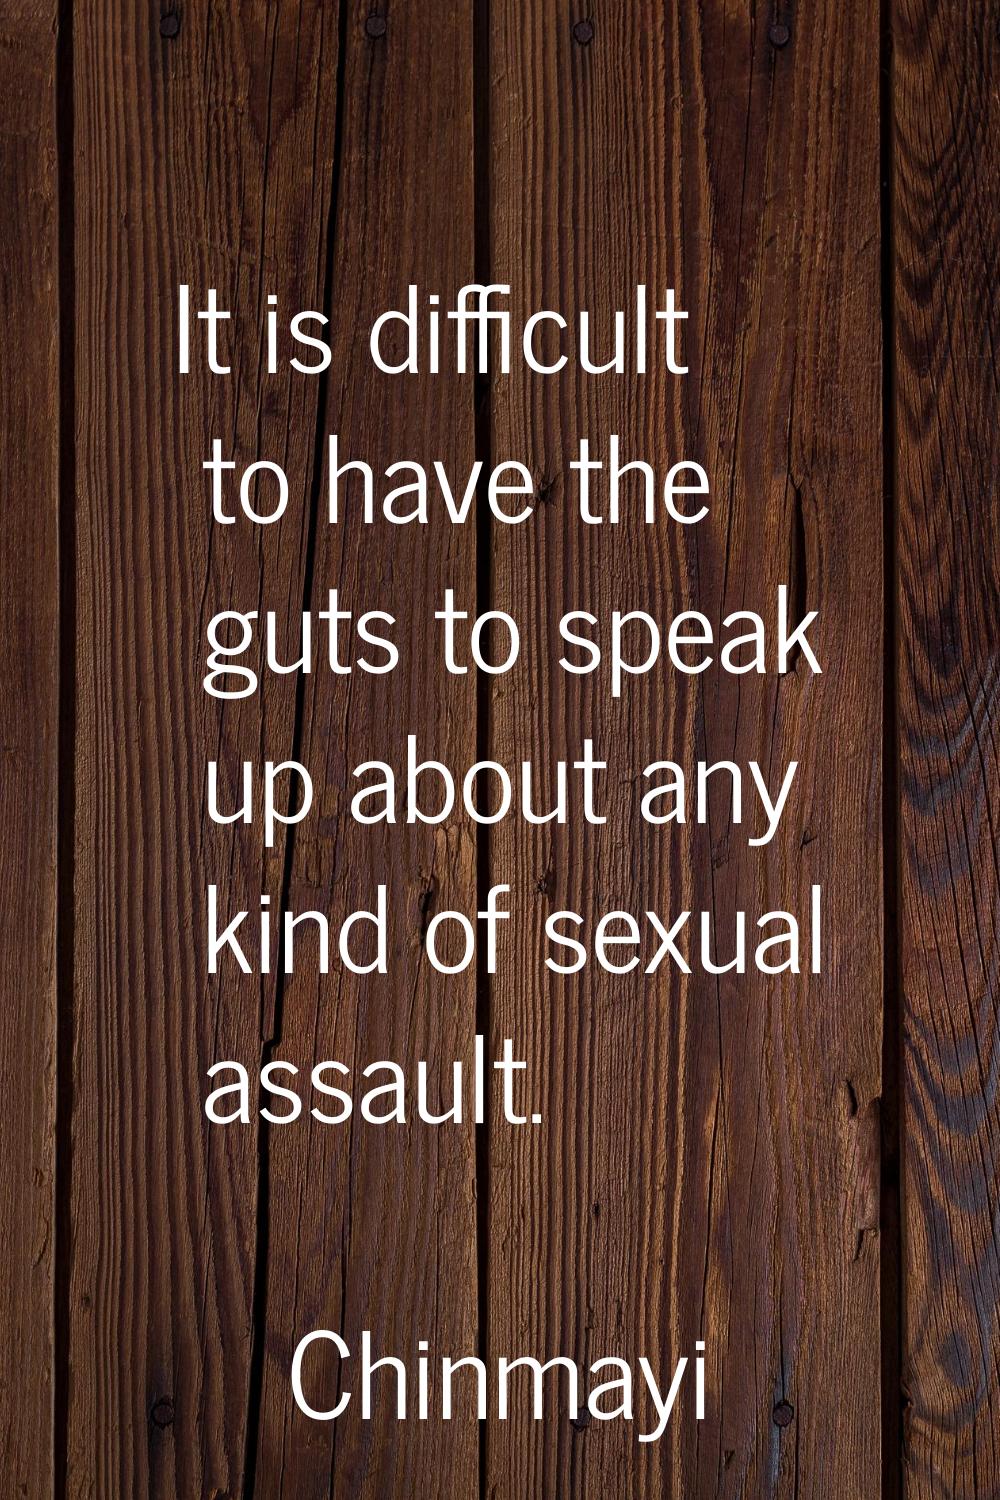 It is difficult to have the guts to speak up about any kind of sexual assault.